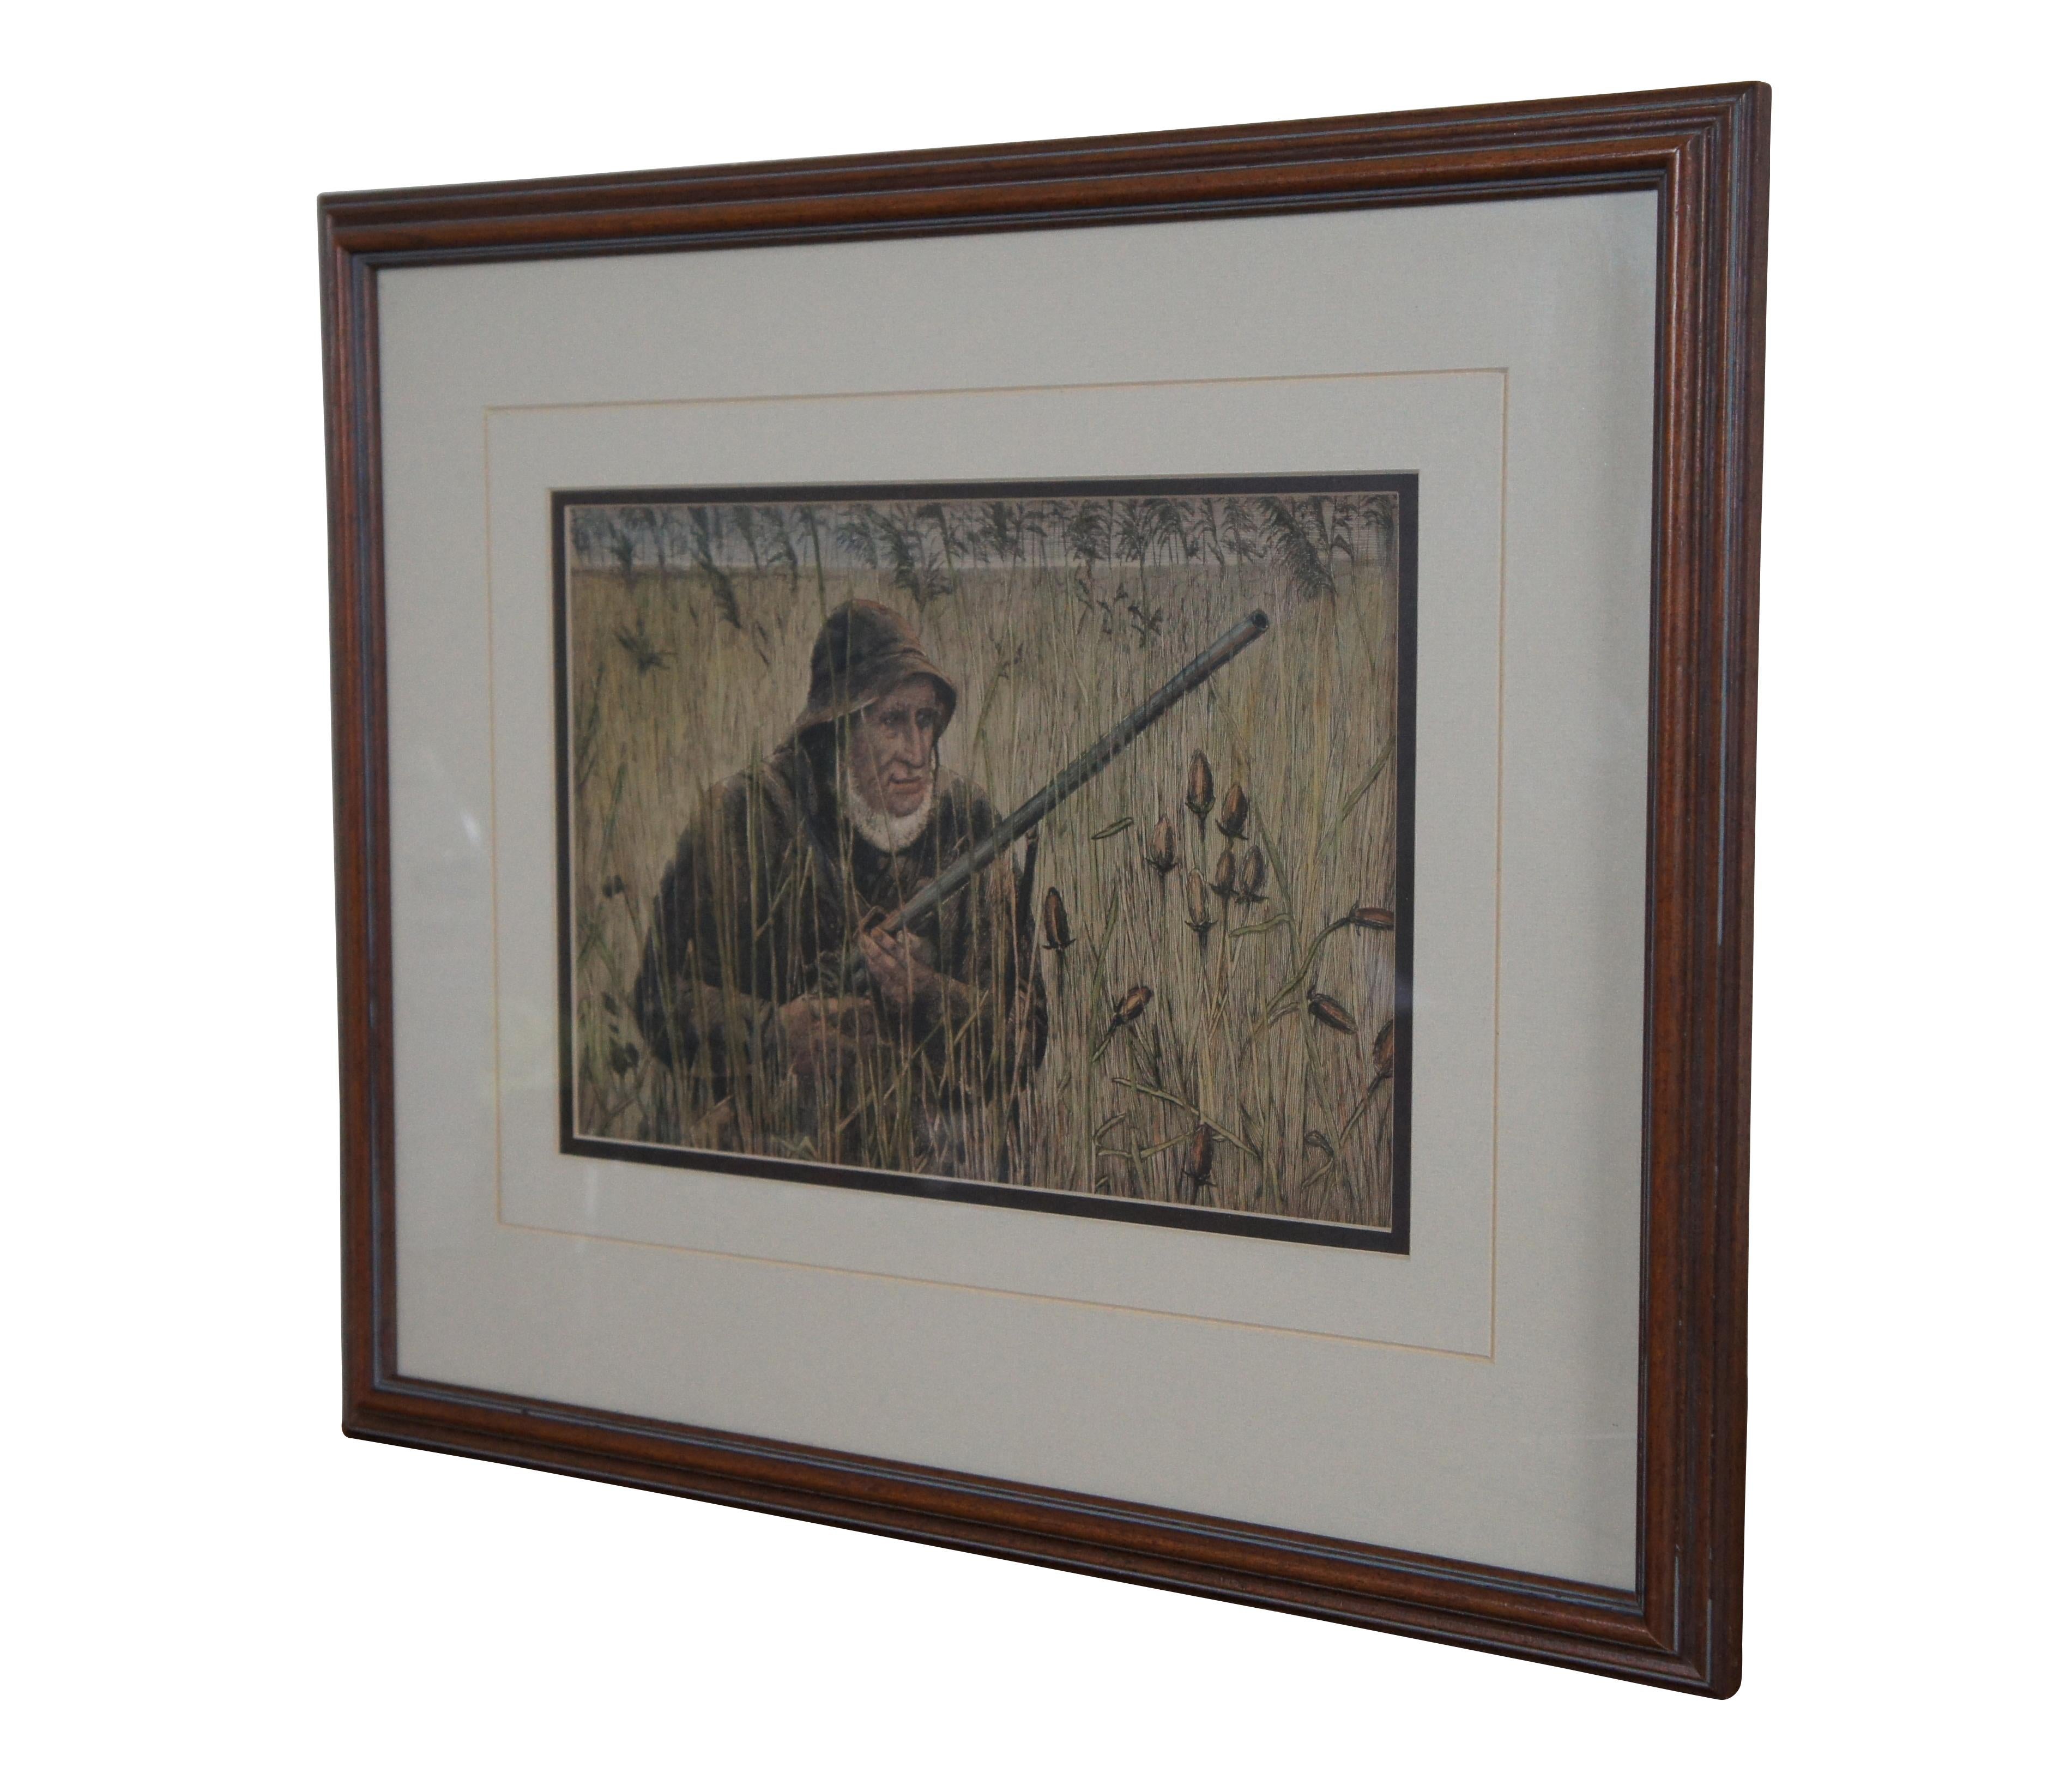 Antique hand colored duck hunt engraving featuring a man with his gun in the field.

Dimensions:
19.5